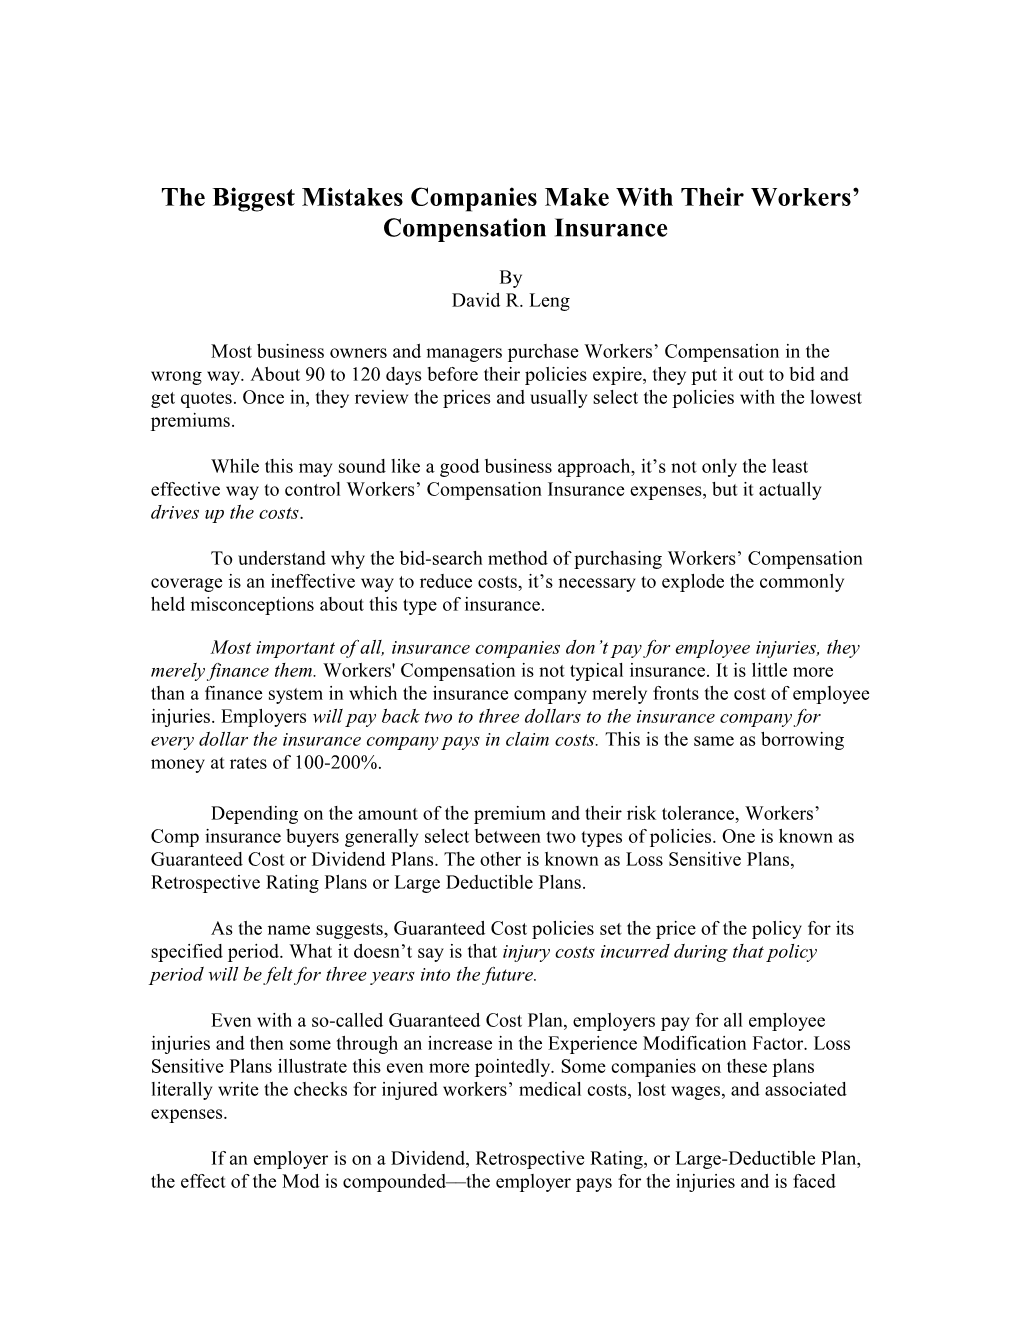 The Biggest Mistakes Companies Make with Their Workers Compensation Insurance